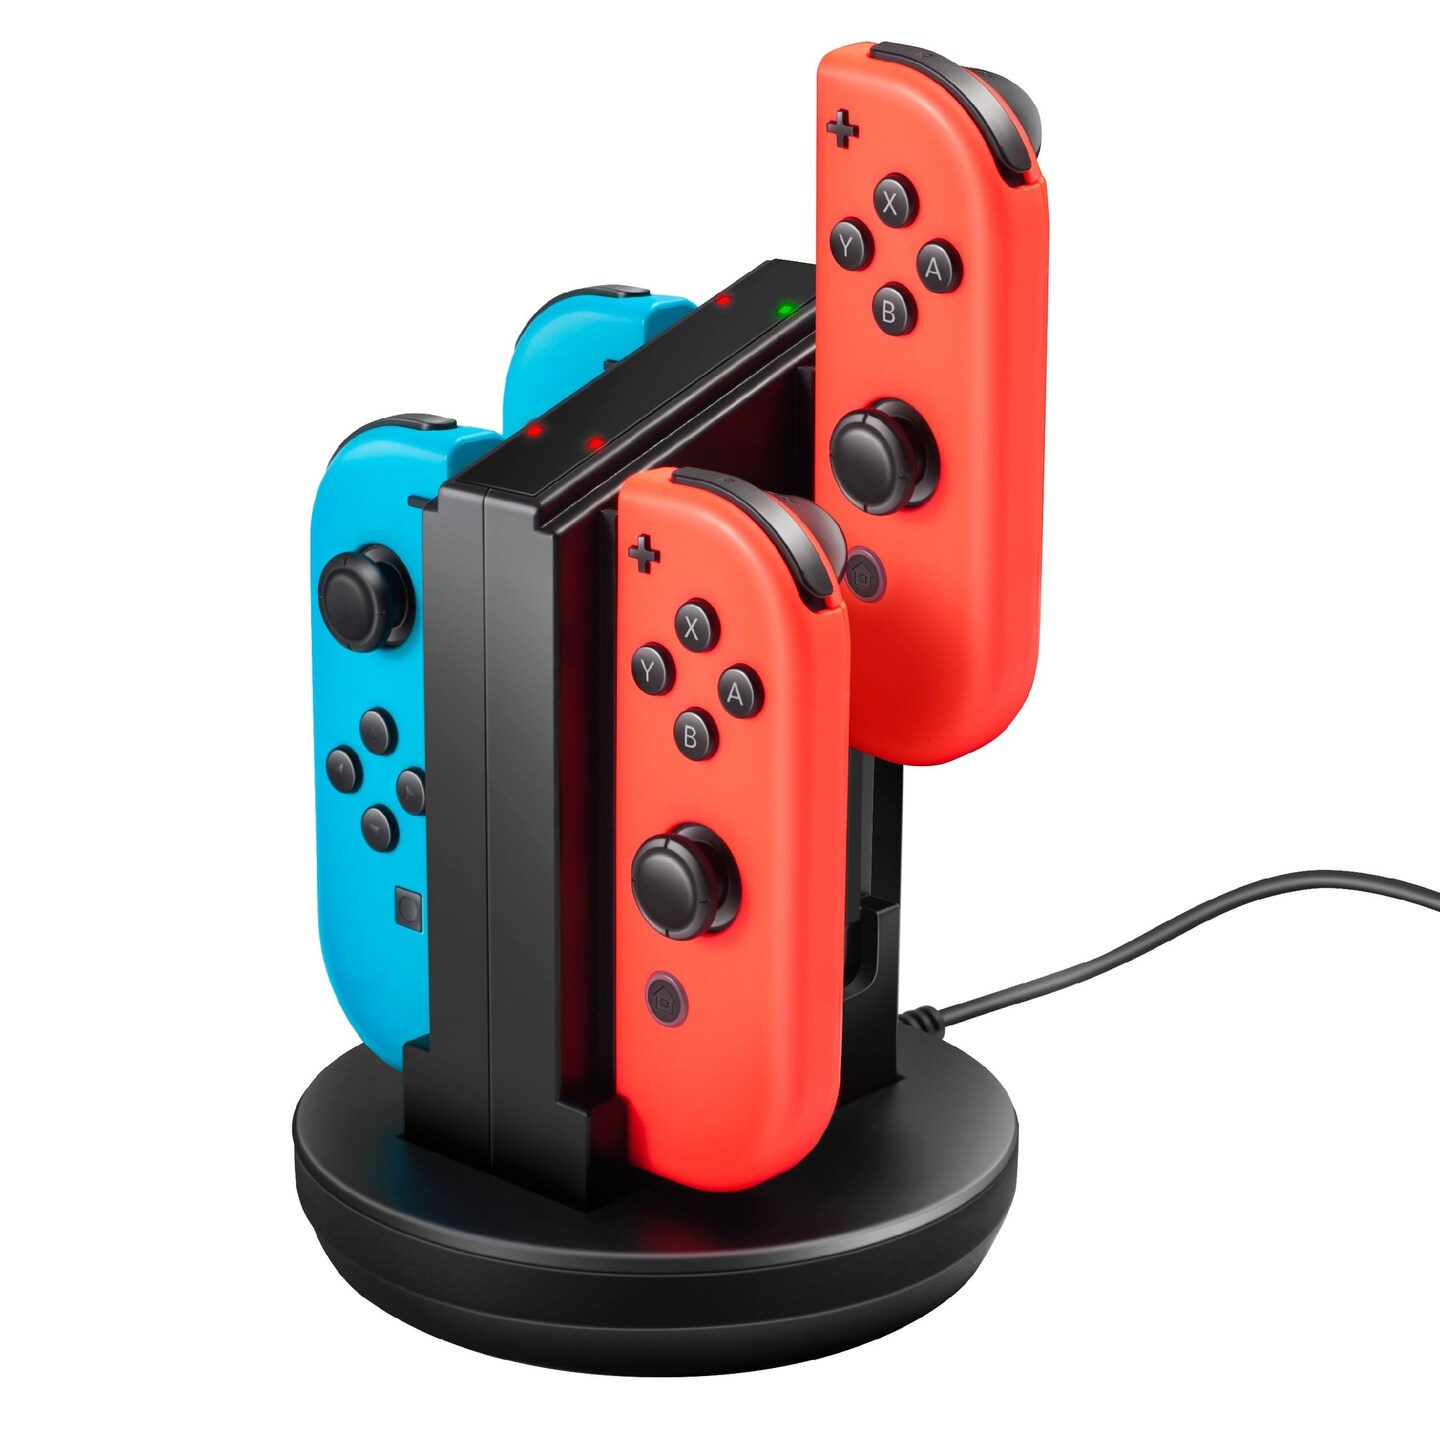 Charger for Nintendo Switch &#x26; OLED Model Joy Con Controller, 4 in 1 USB Charging Station Dock Stand Accessories